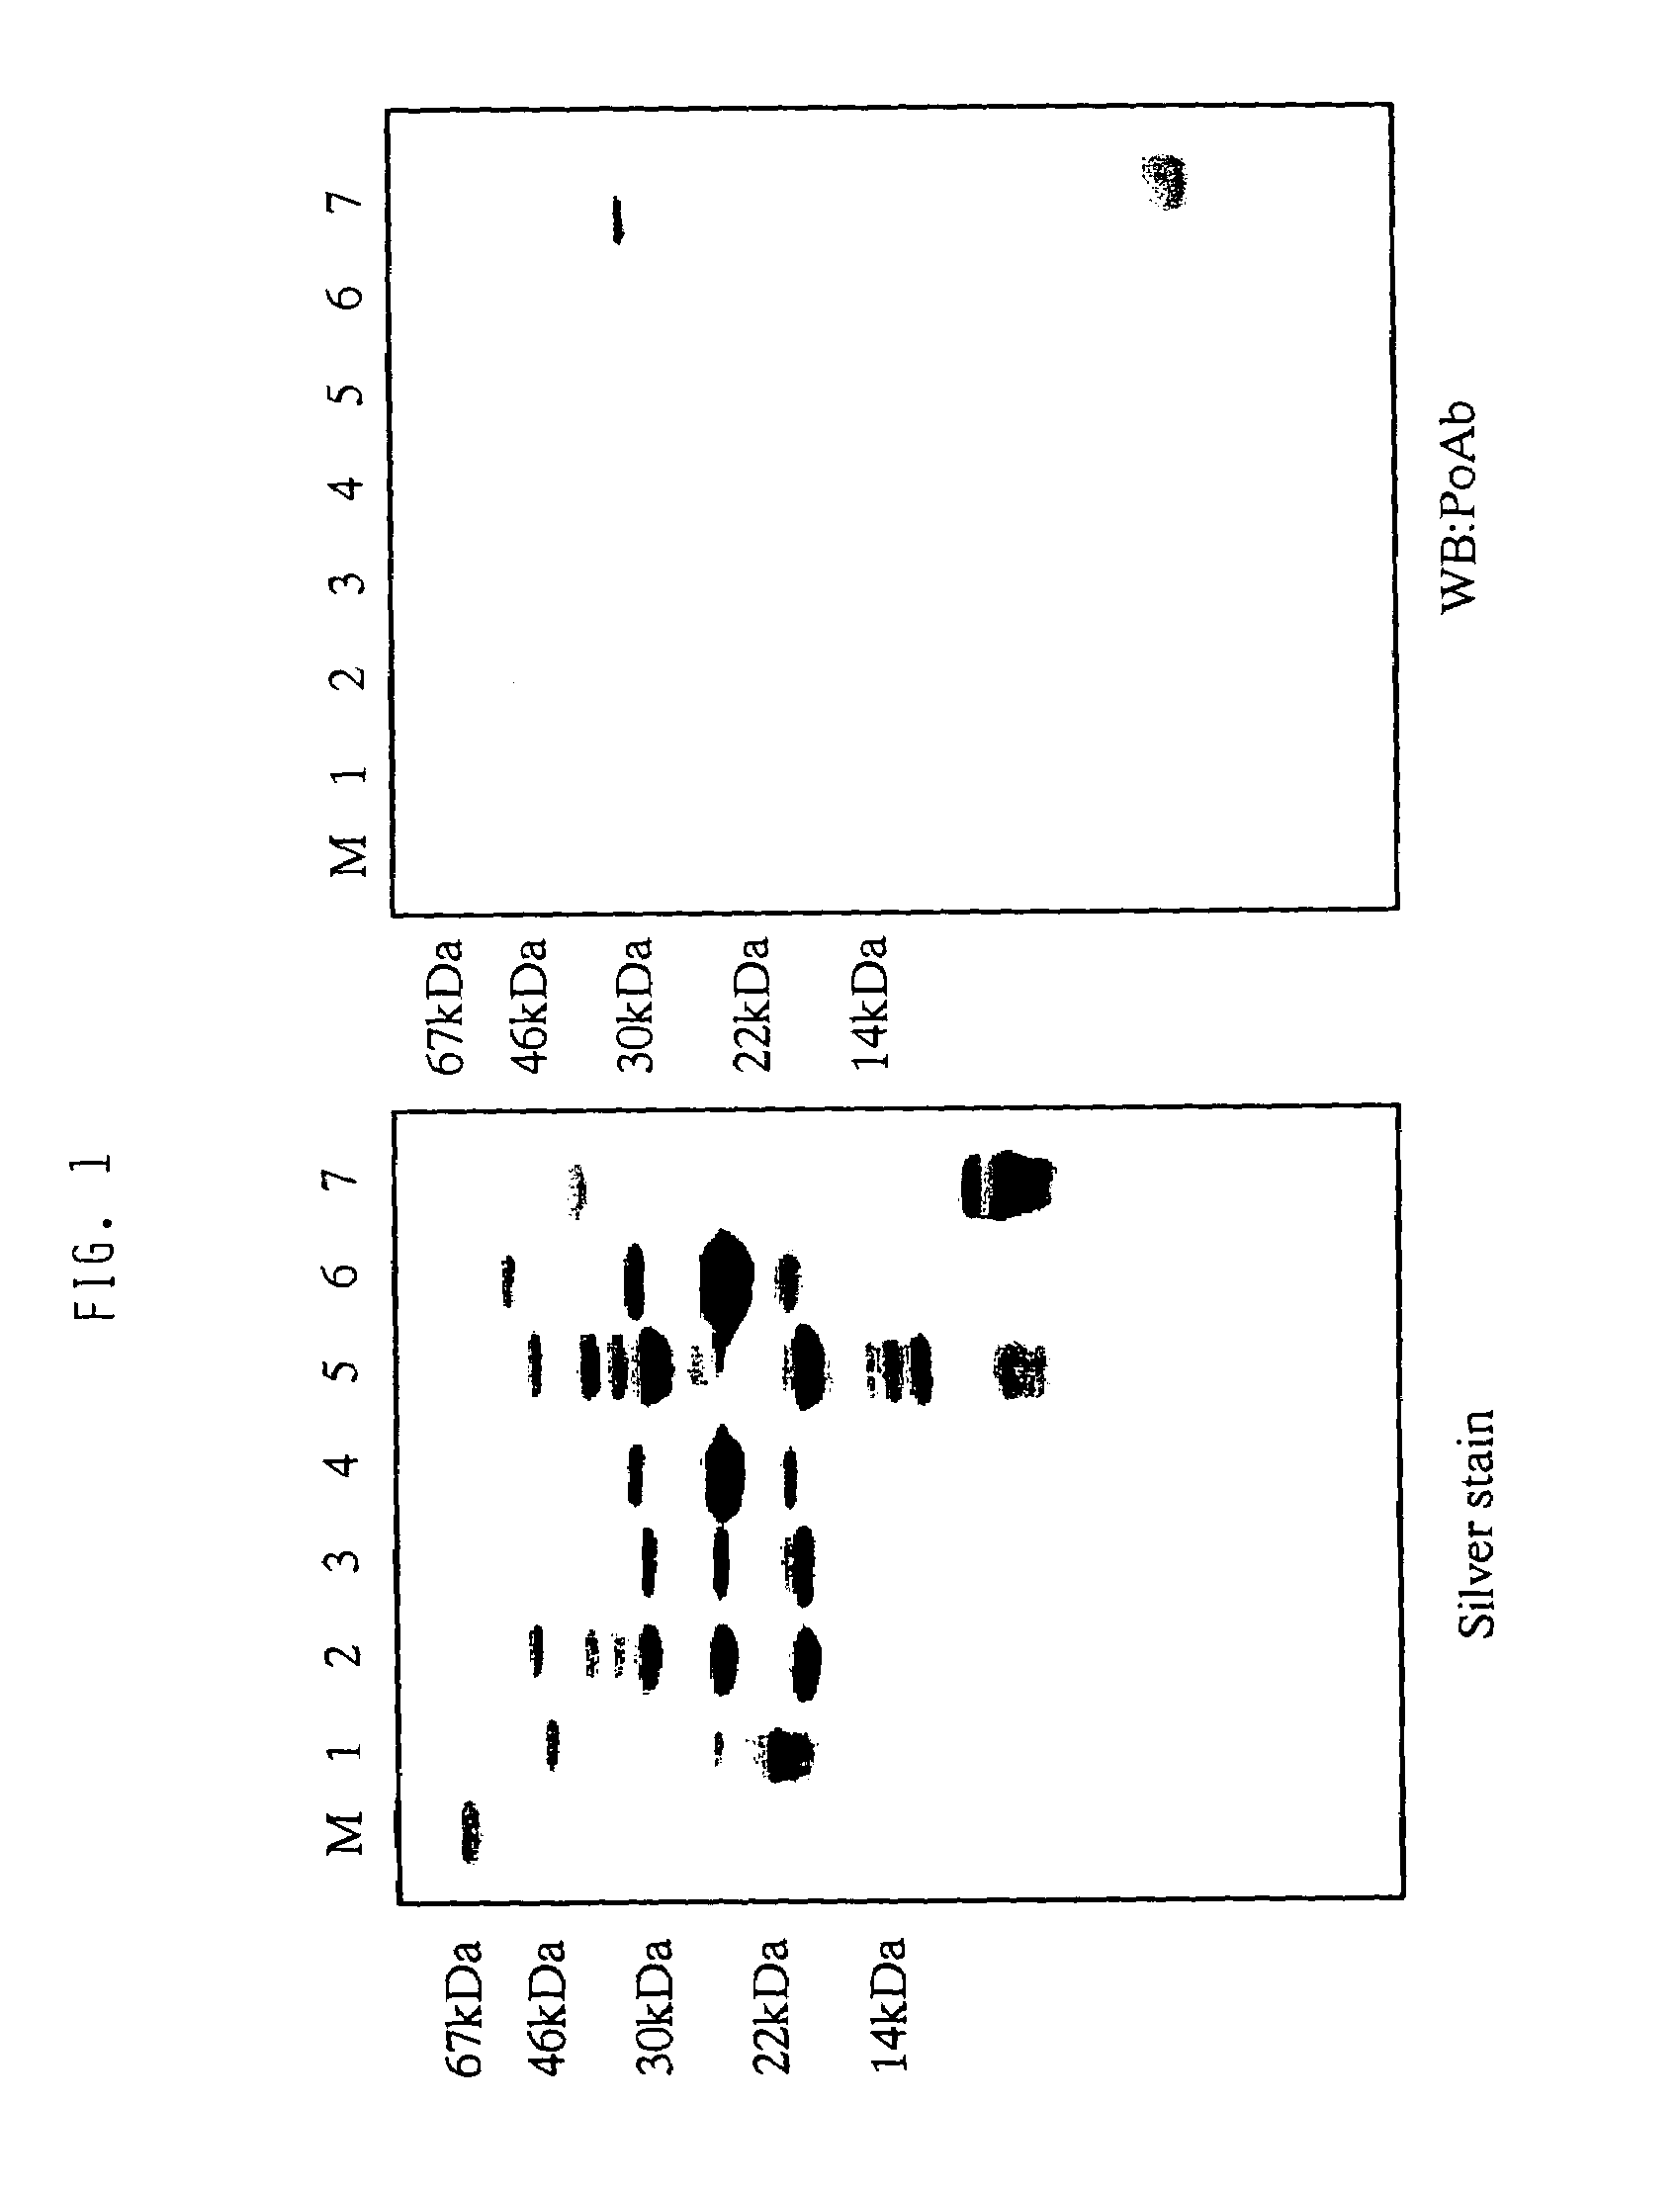 Peptide fragments having cell death inhibitory activity